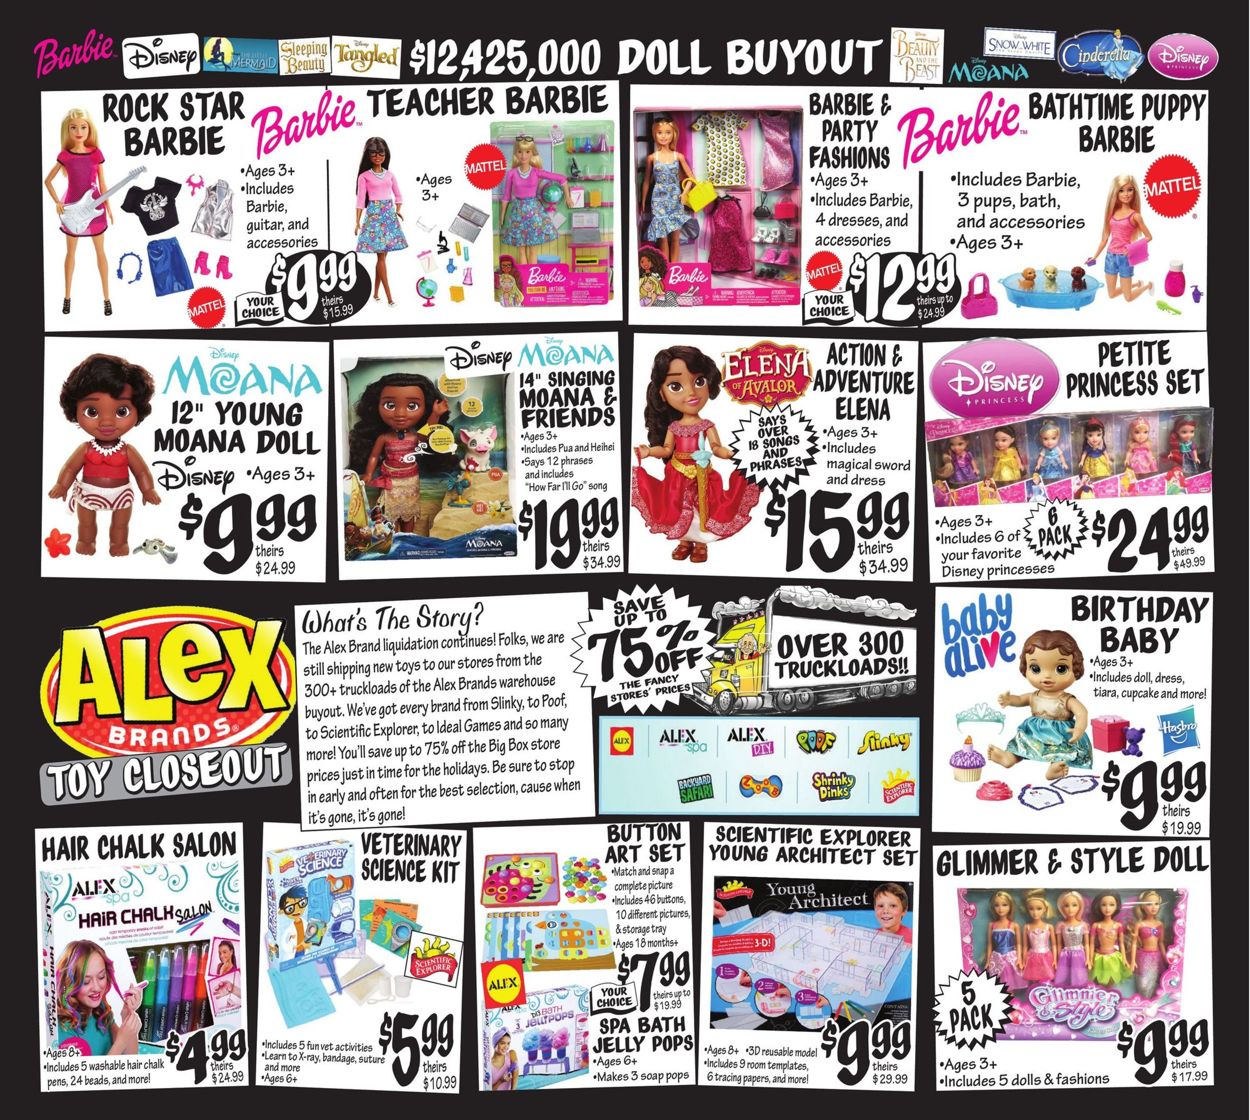 Ollie's Ad from 11/11/2020